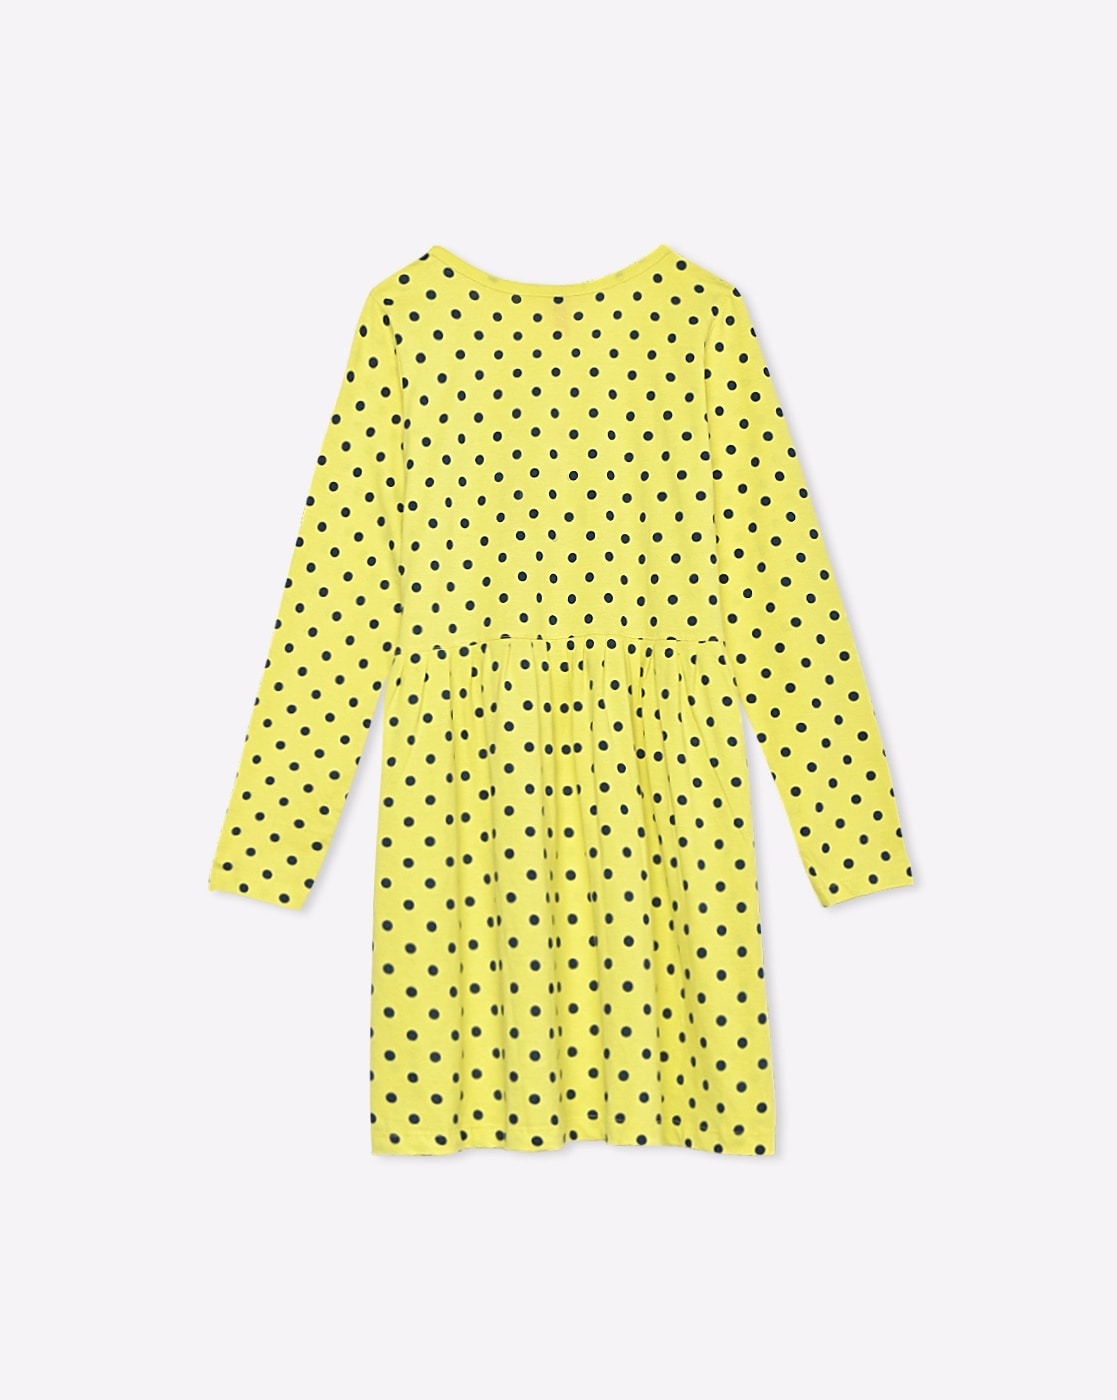 New Phase Eight Dress Navy Yellow Polka Dot Spotted Dress Summer Wedding  Outfit | eBay